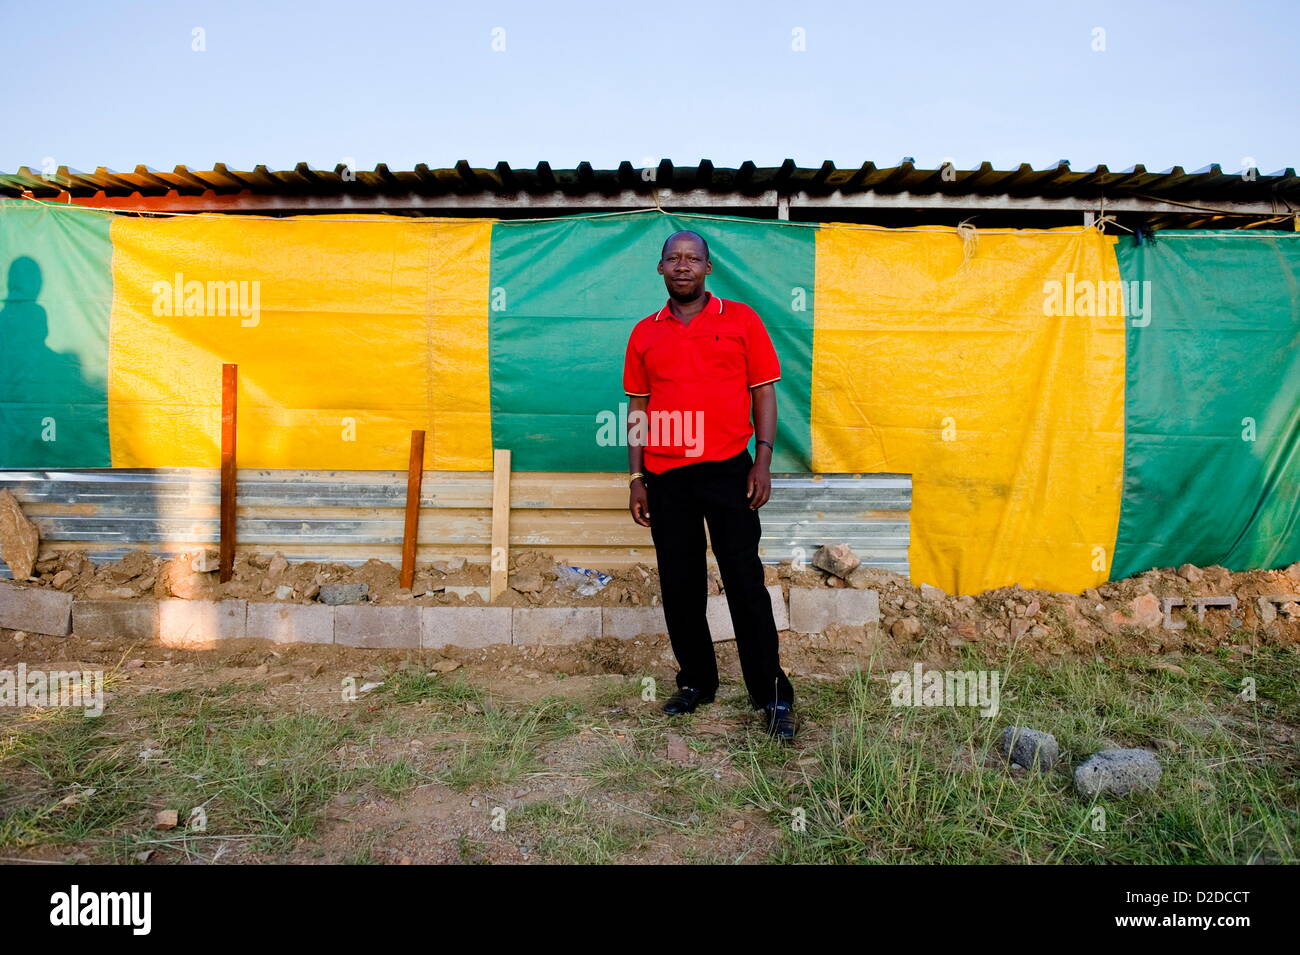 CARLTONVILLE, SOUTH AFRICA: Samuel Motsoanakaba, a mineworker at Harmony Gold’s Kusasalethu Mine stands outside a church on January 17, 2013 in Carltonville, South Africa. About 80 miners found themselves stranded and had to find refuge at a church after they were locked out Kusasalethu's mine hostels. The Kusasalethu shaft has been temporarily shut down due to violence and illegal sit-ins at the mine. (Photo by Gallo Images / City Press / Herman Verwey) Stock Photo